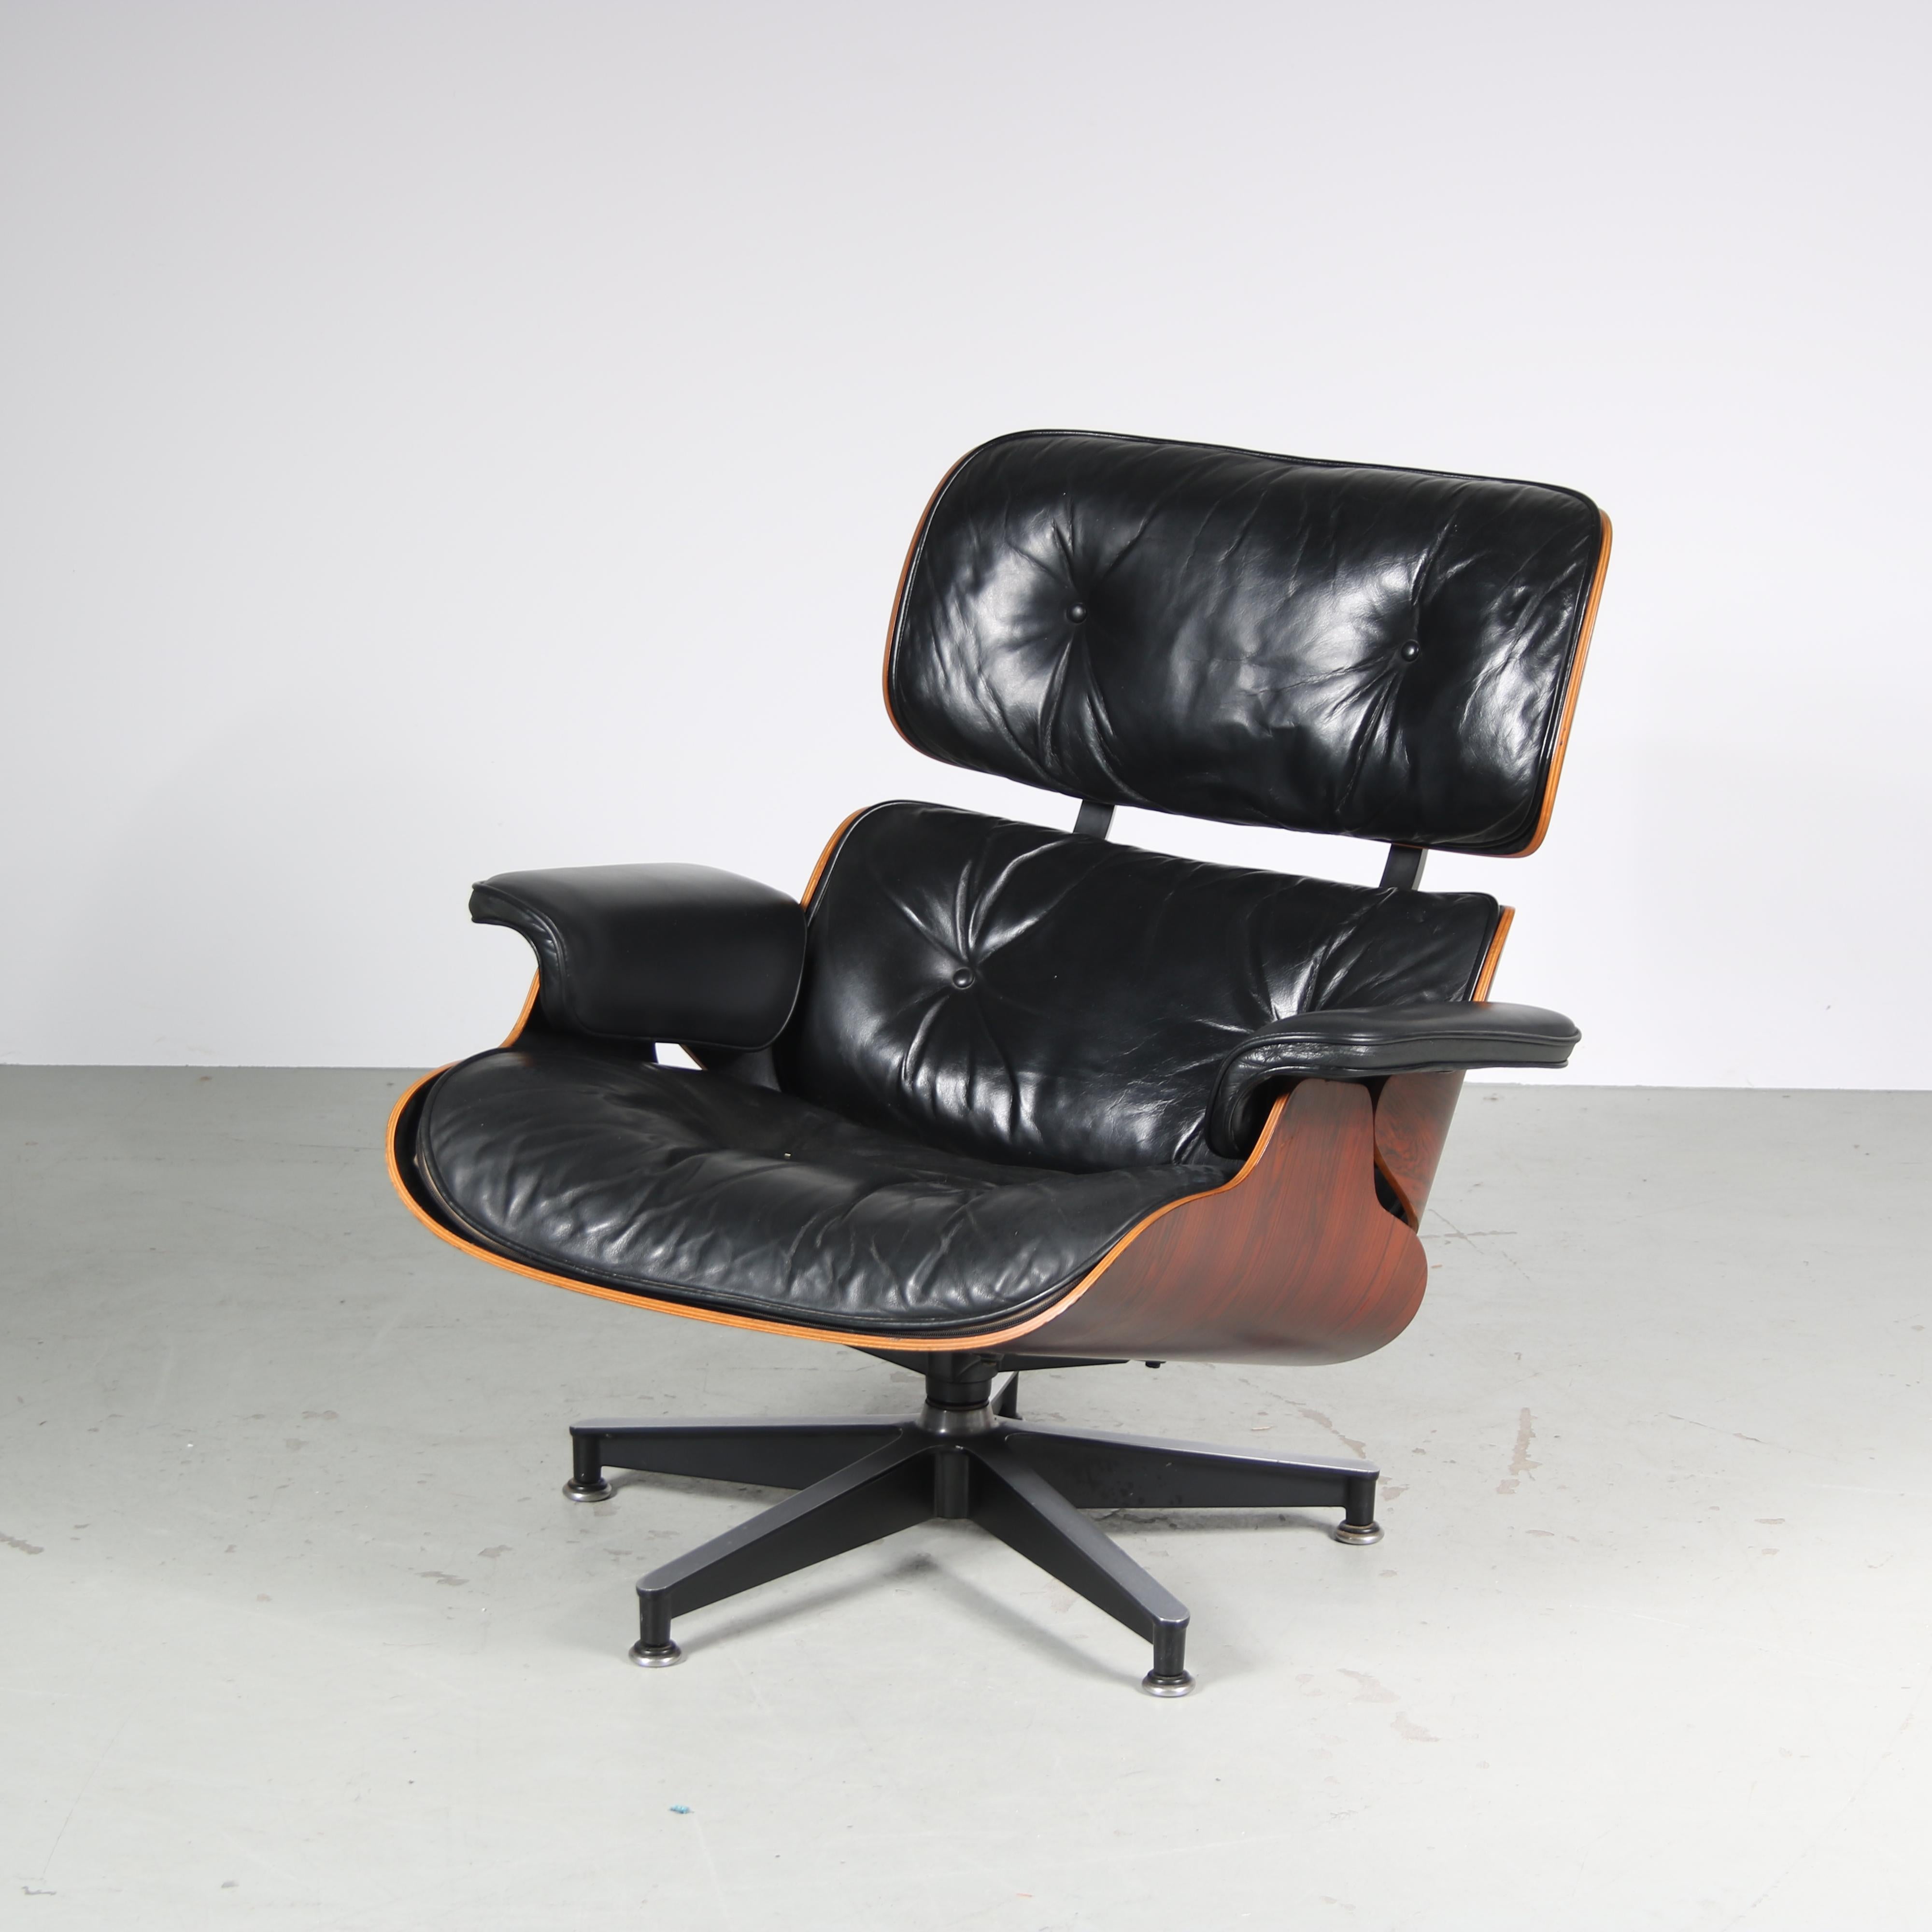 American 20th Century Lounge Chair by Charles & Ray Eames for Herman Miller, USA